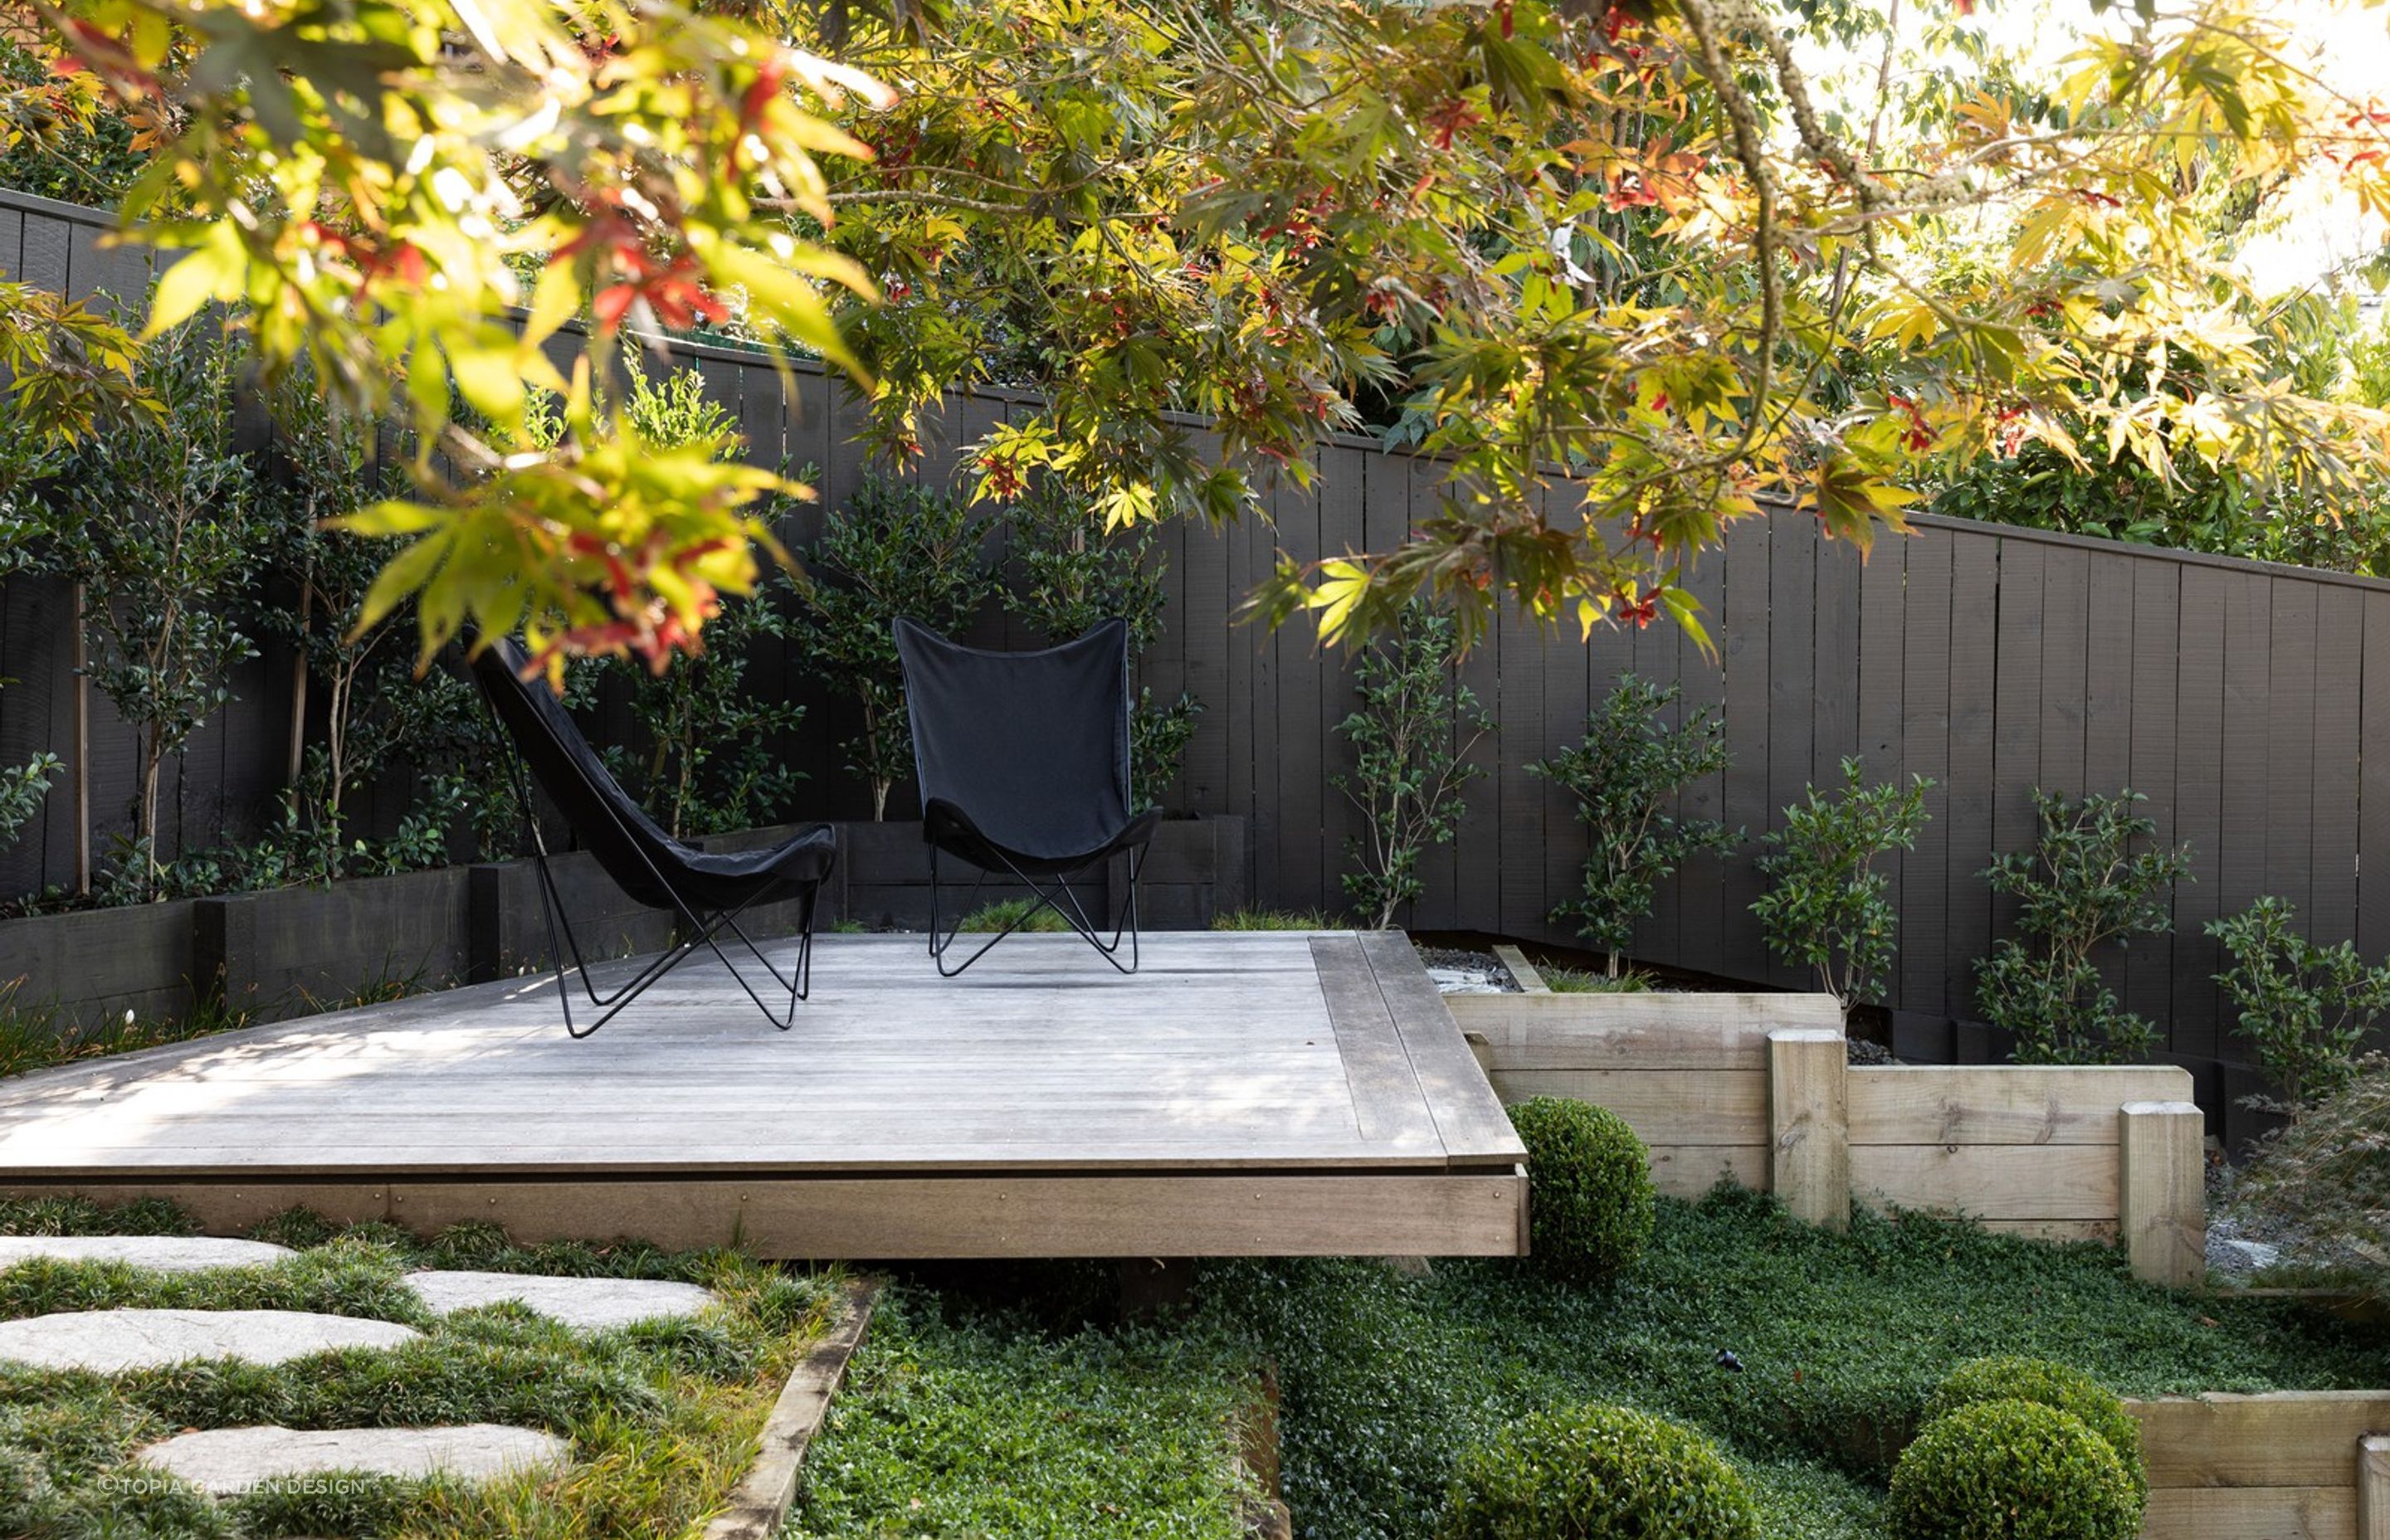 A secluded spot in a corner of a Japanese inspired garden in Crocus Place.